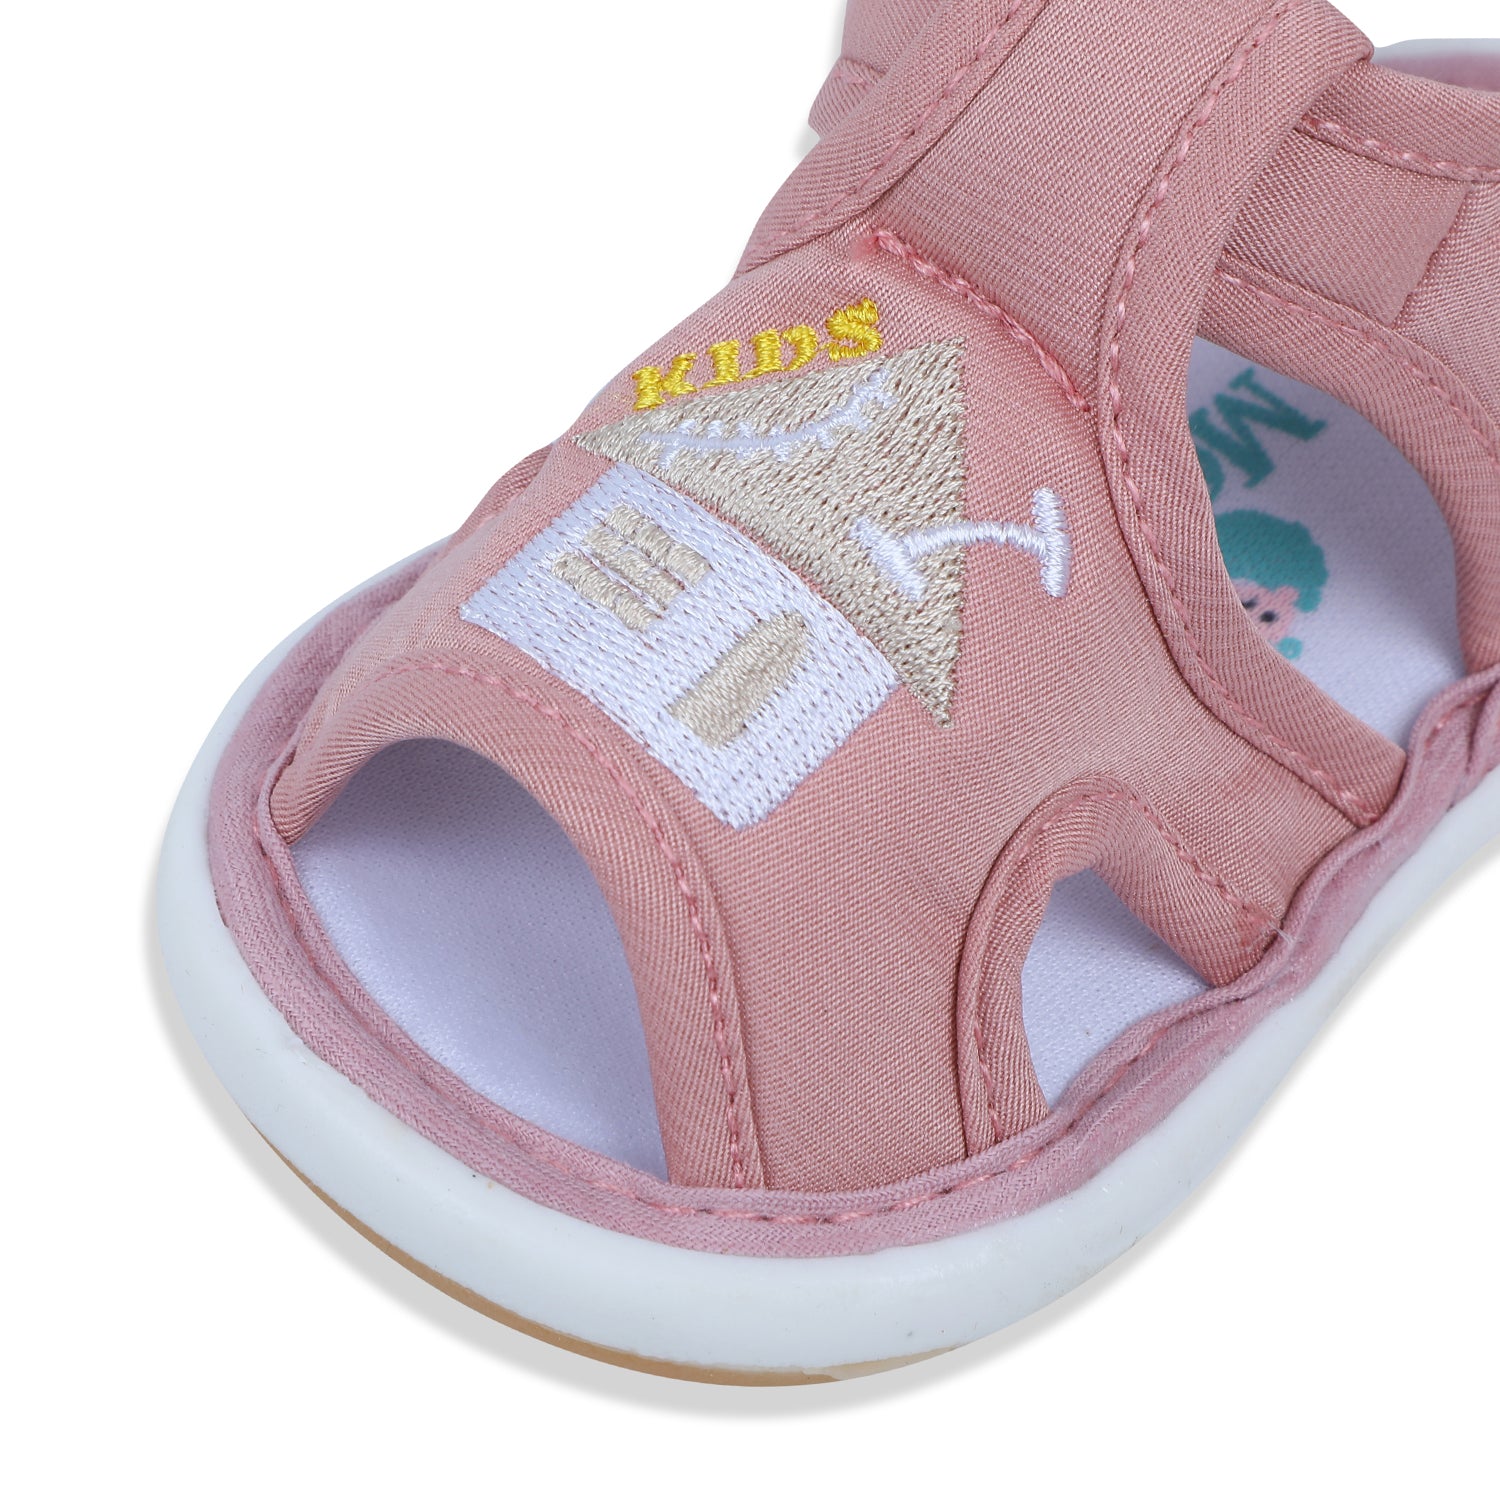 Baby Moo My Pet's House Chu-Chu Sound Breathable Anti-Skid Sandals - Pink